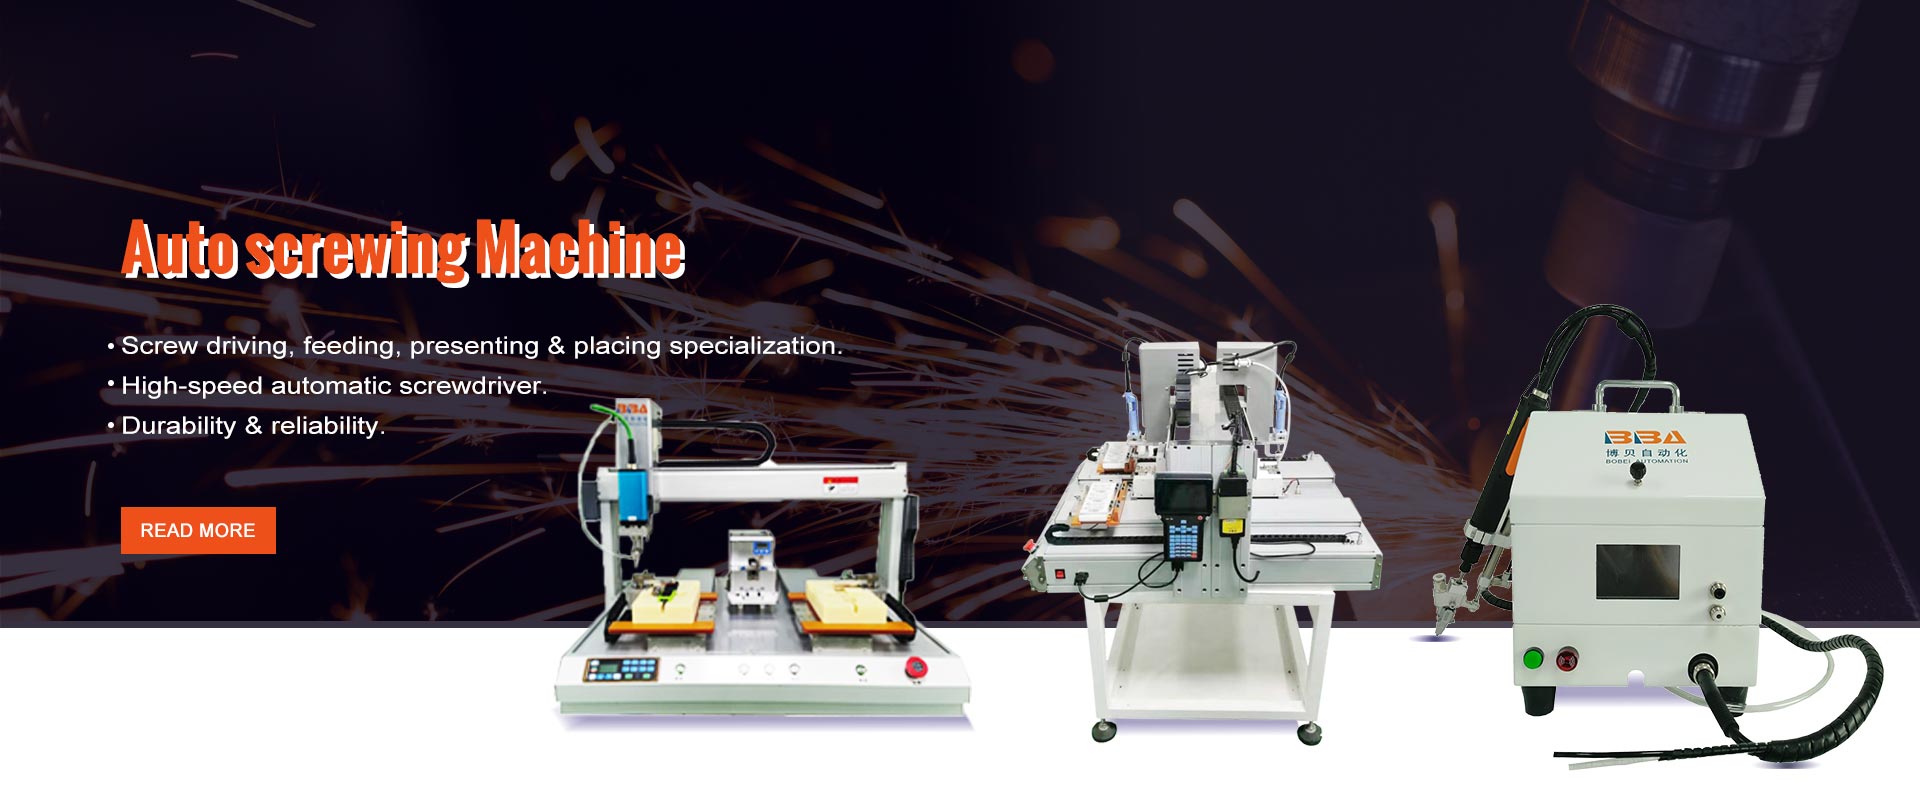 3 axis screw fitting machine for electronic products